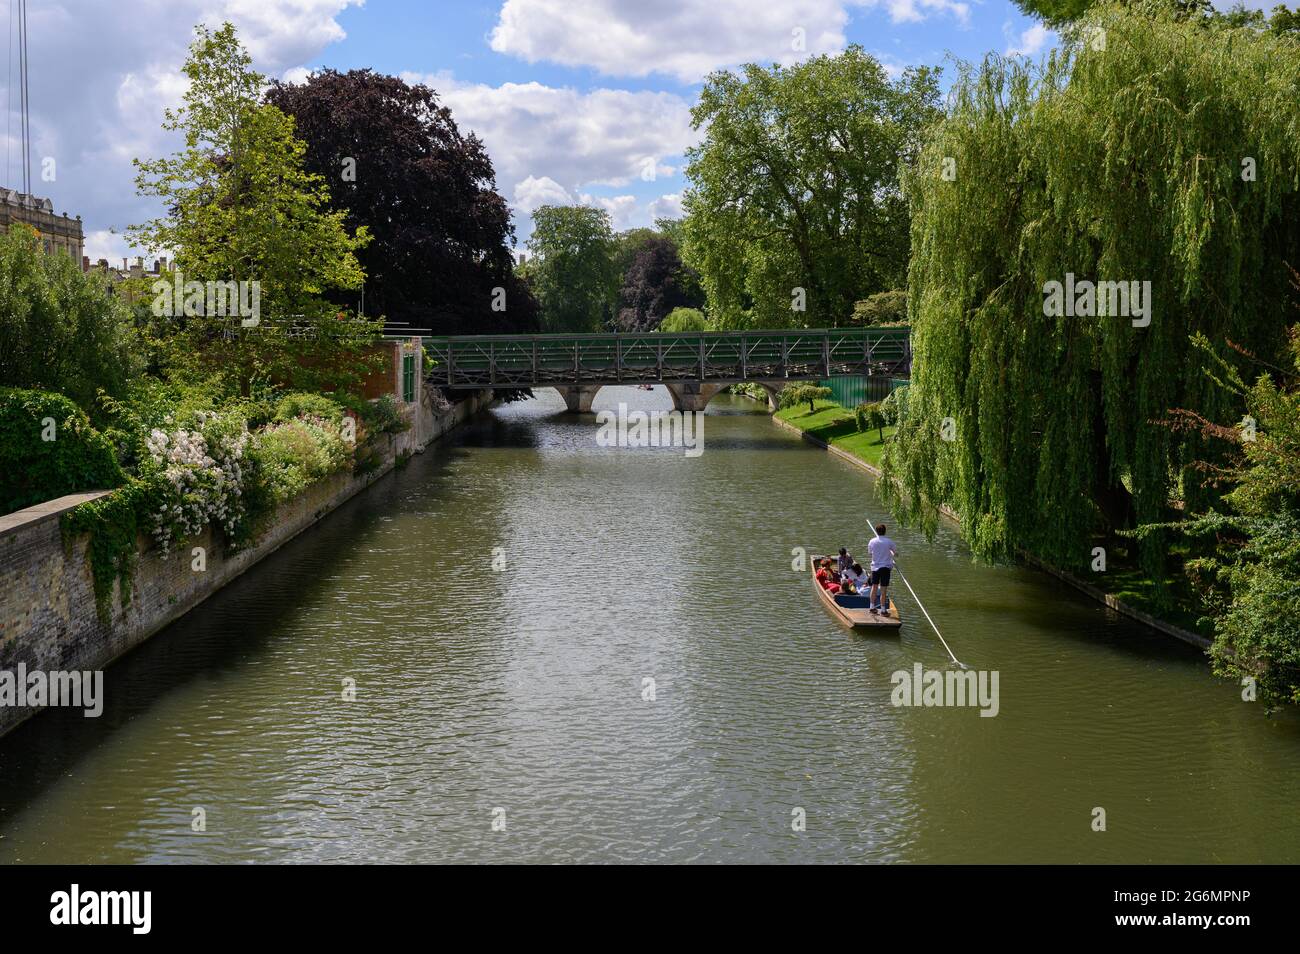 Punting on the River Cam in Cambridge, England. Stock Photo